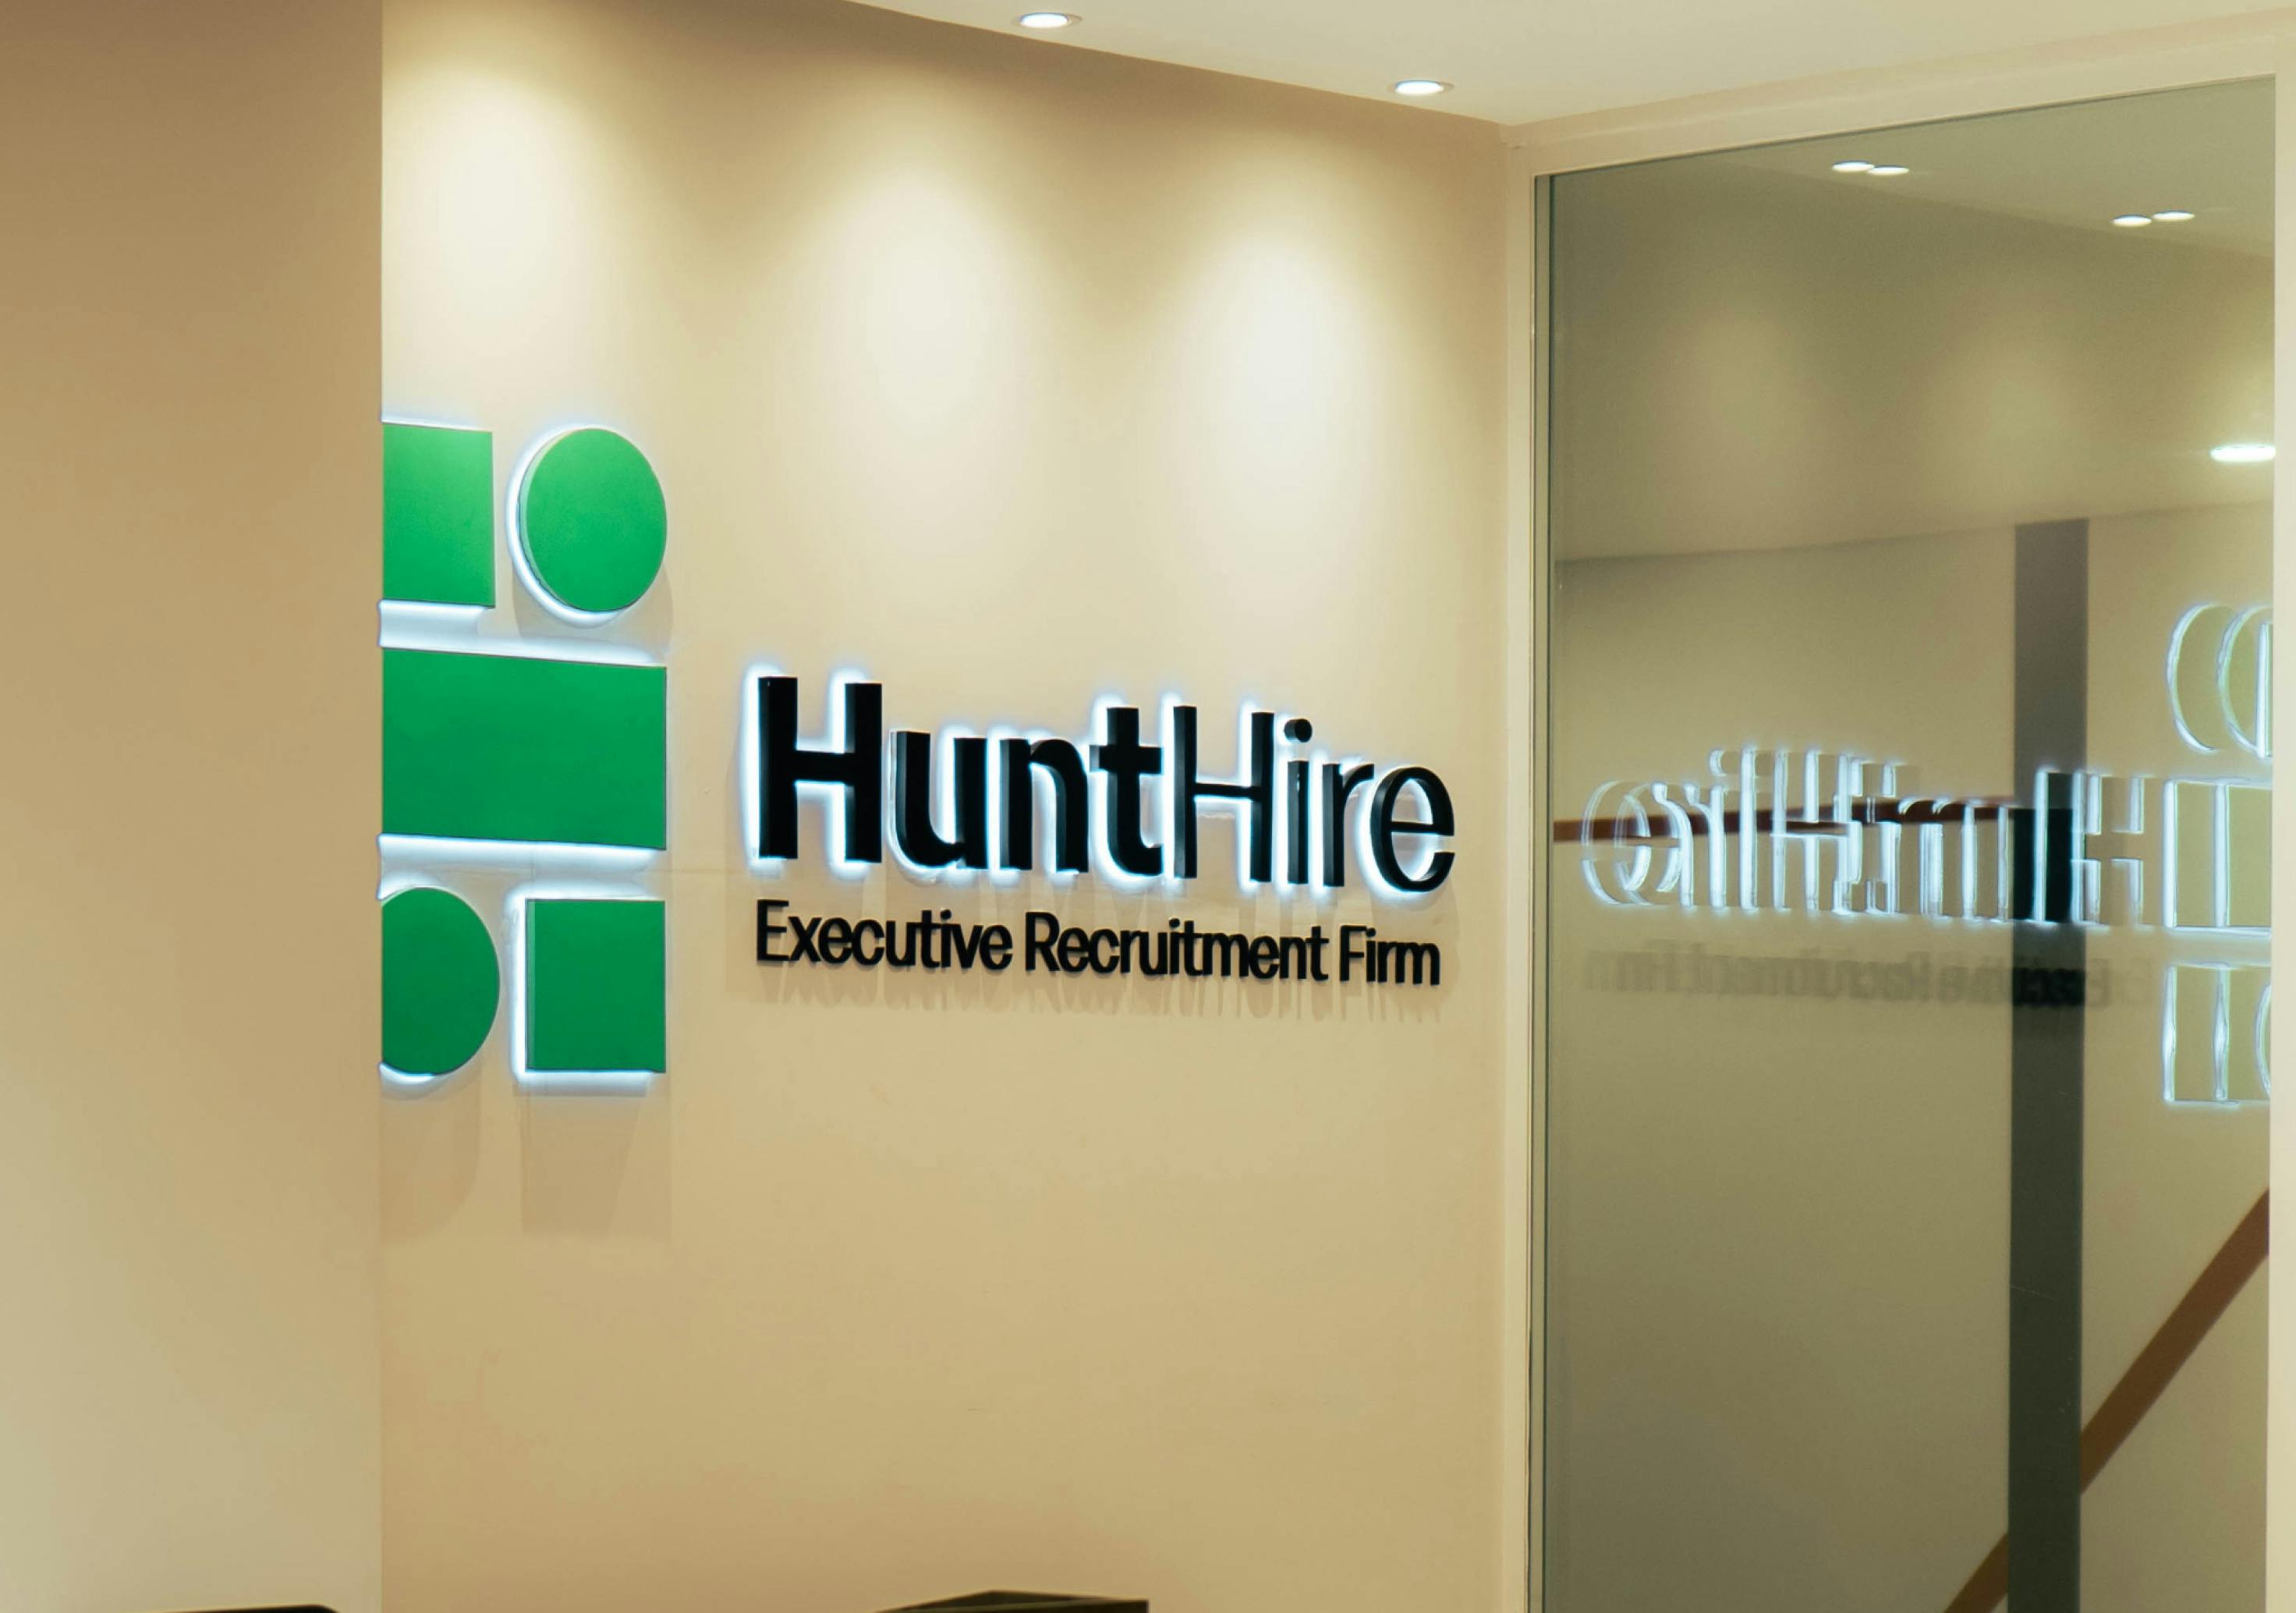 Executive recruitment firm helping your company hire the right team